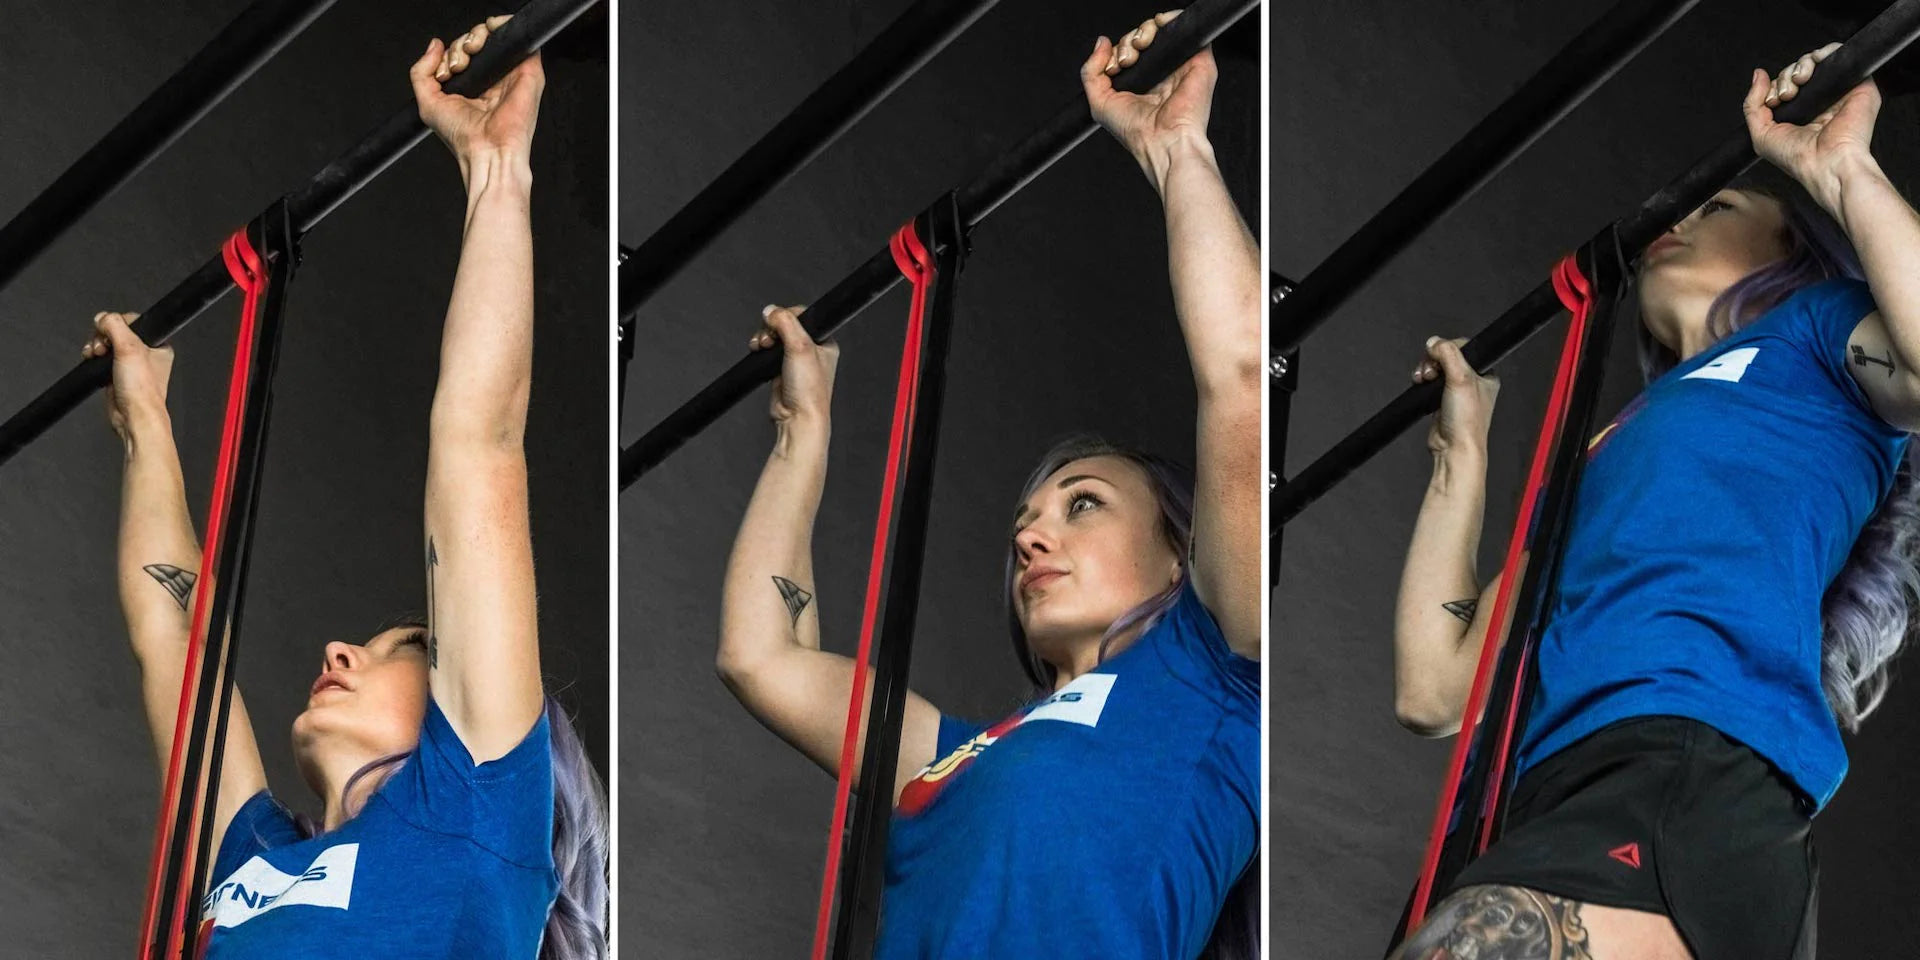 The Best Pull-Up Bars (2024)